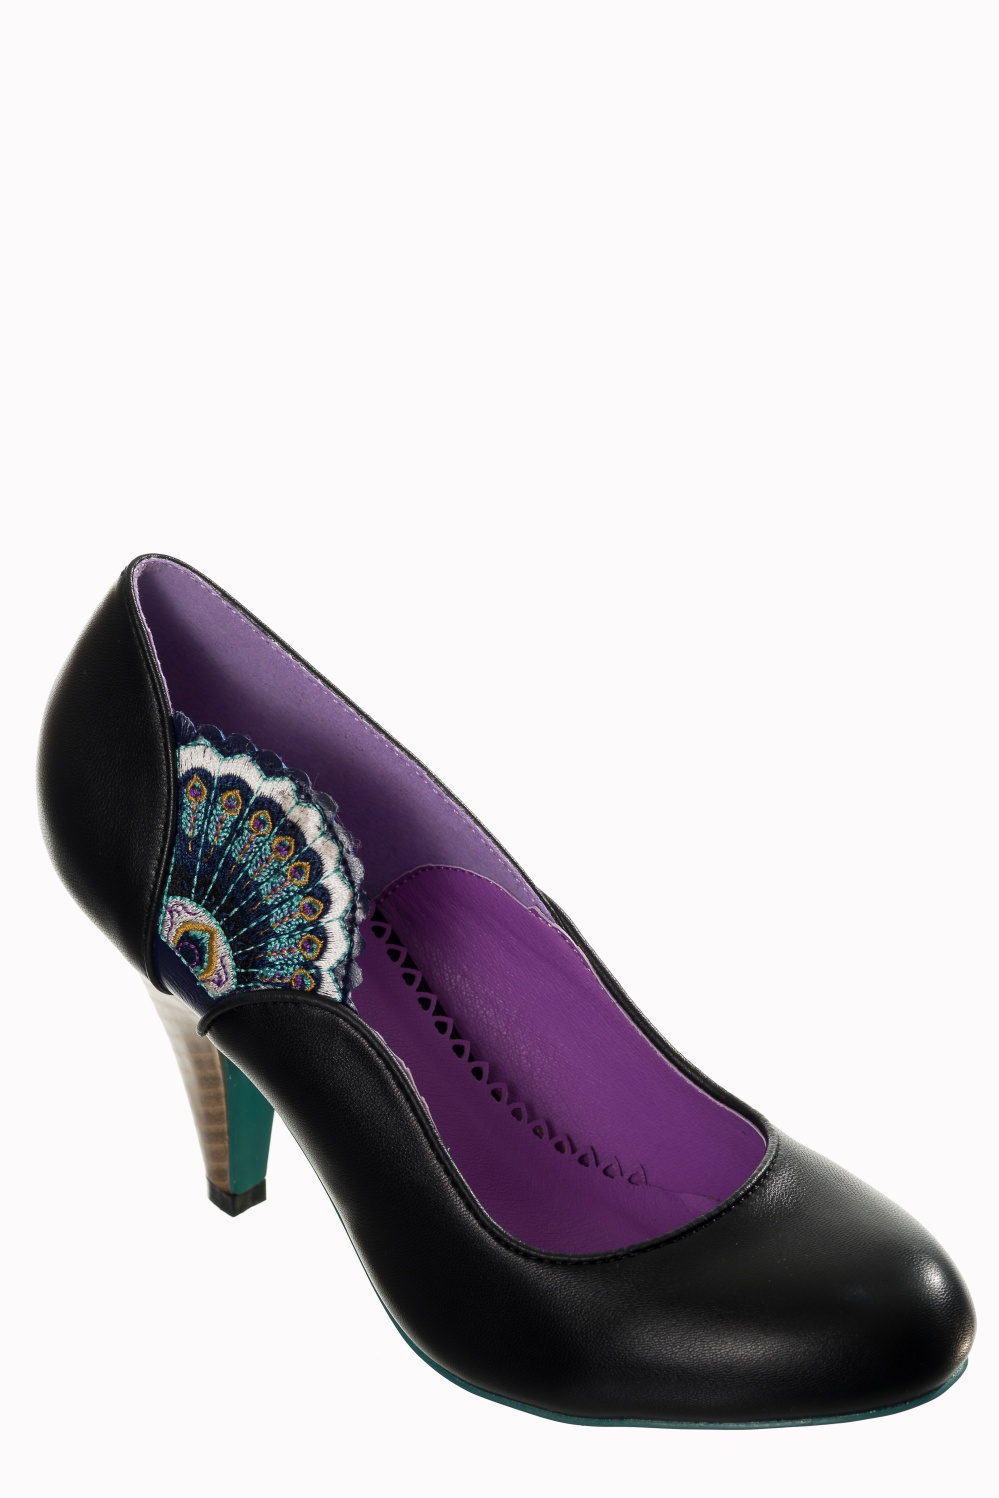 Dancing Days Sway 50s Black Peacock Shoes